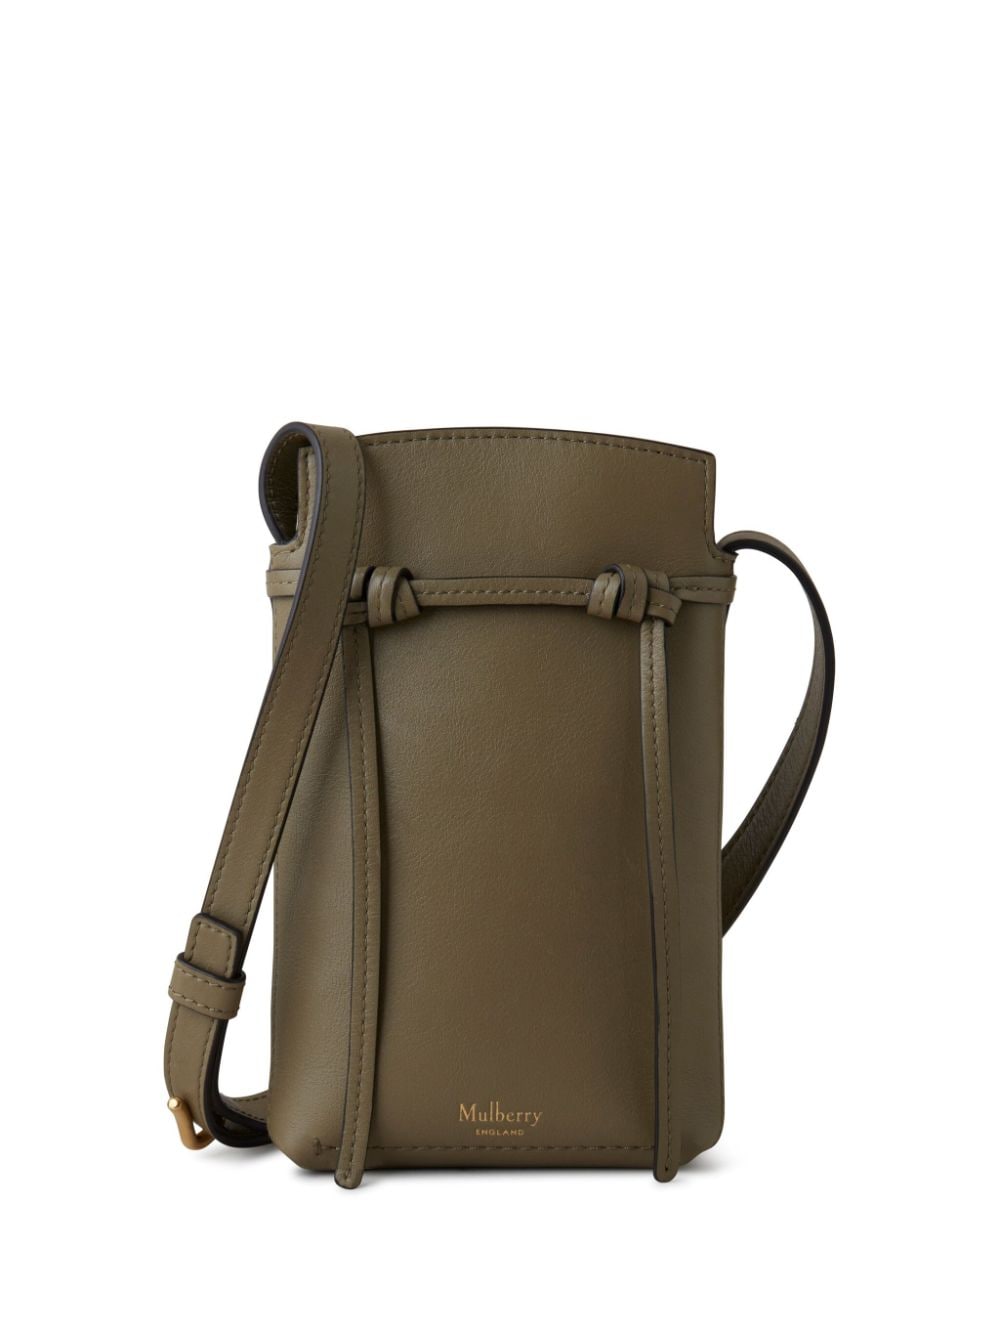 Mulberry Clovelly Leather Phone Bag In Green